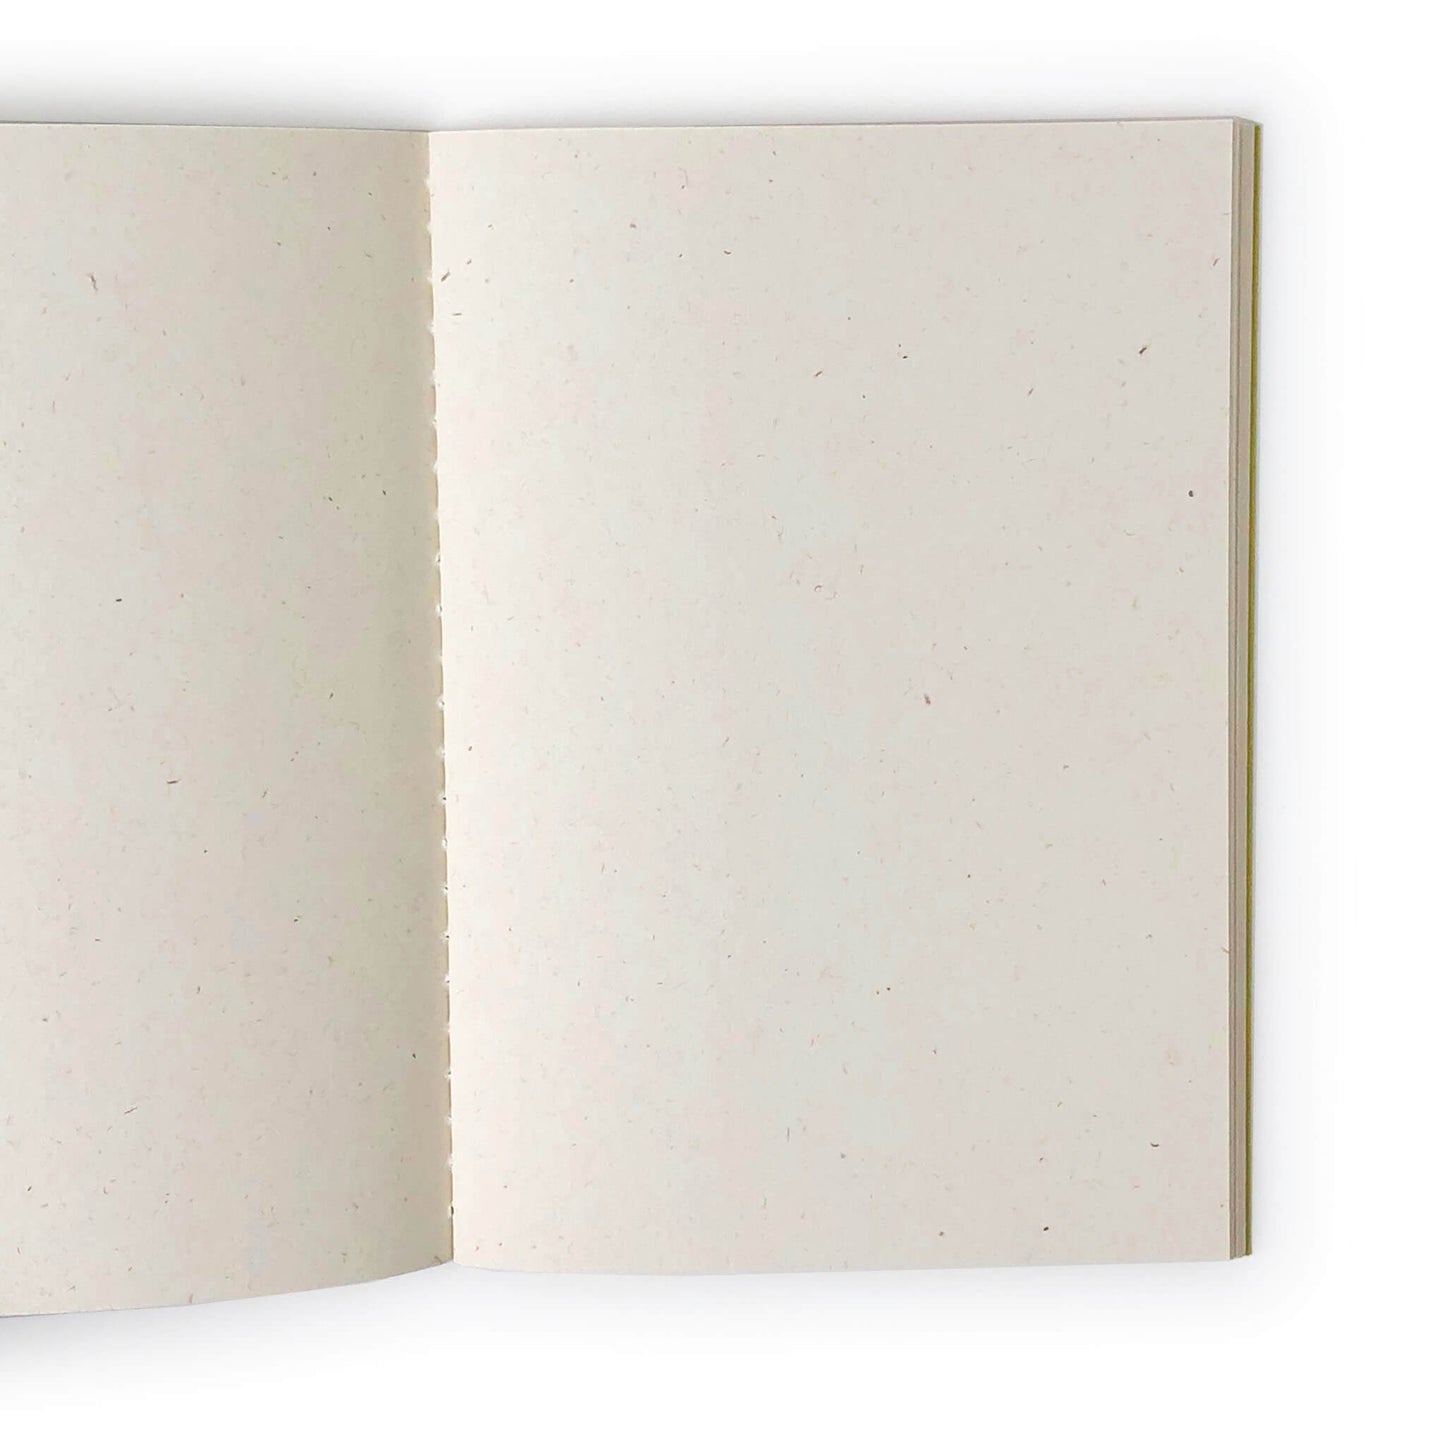 An opened notebook with smooth pulp-colored stitched blank pages inside.